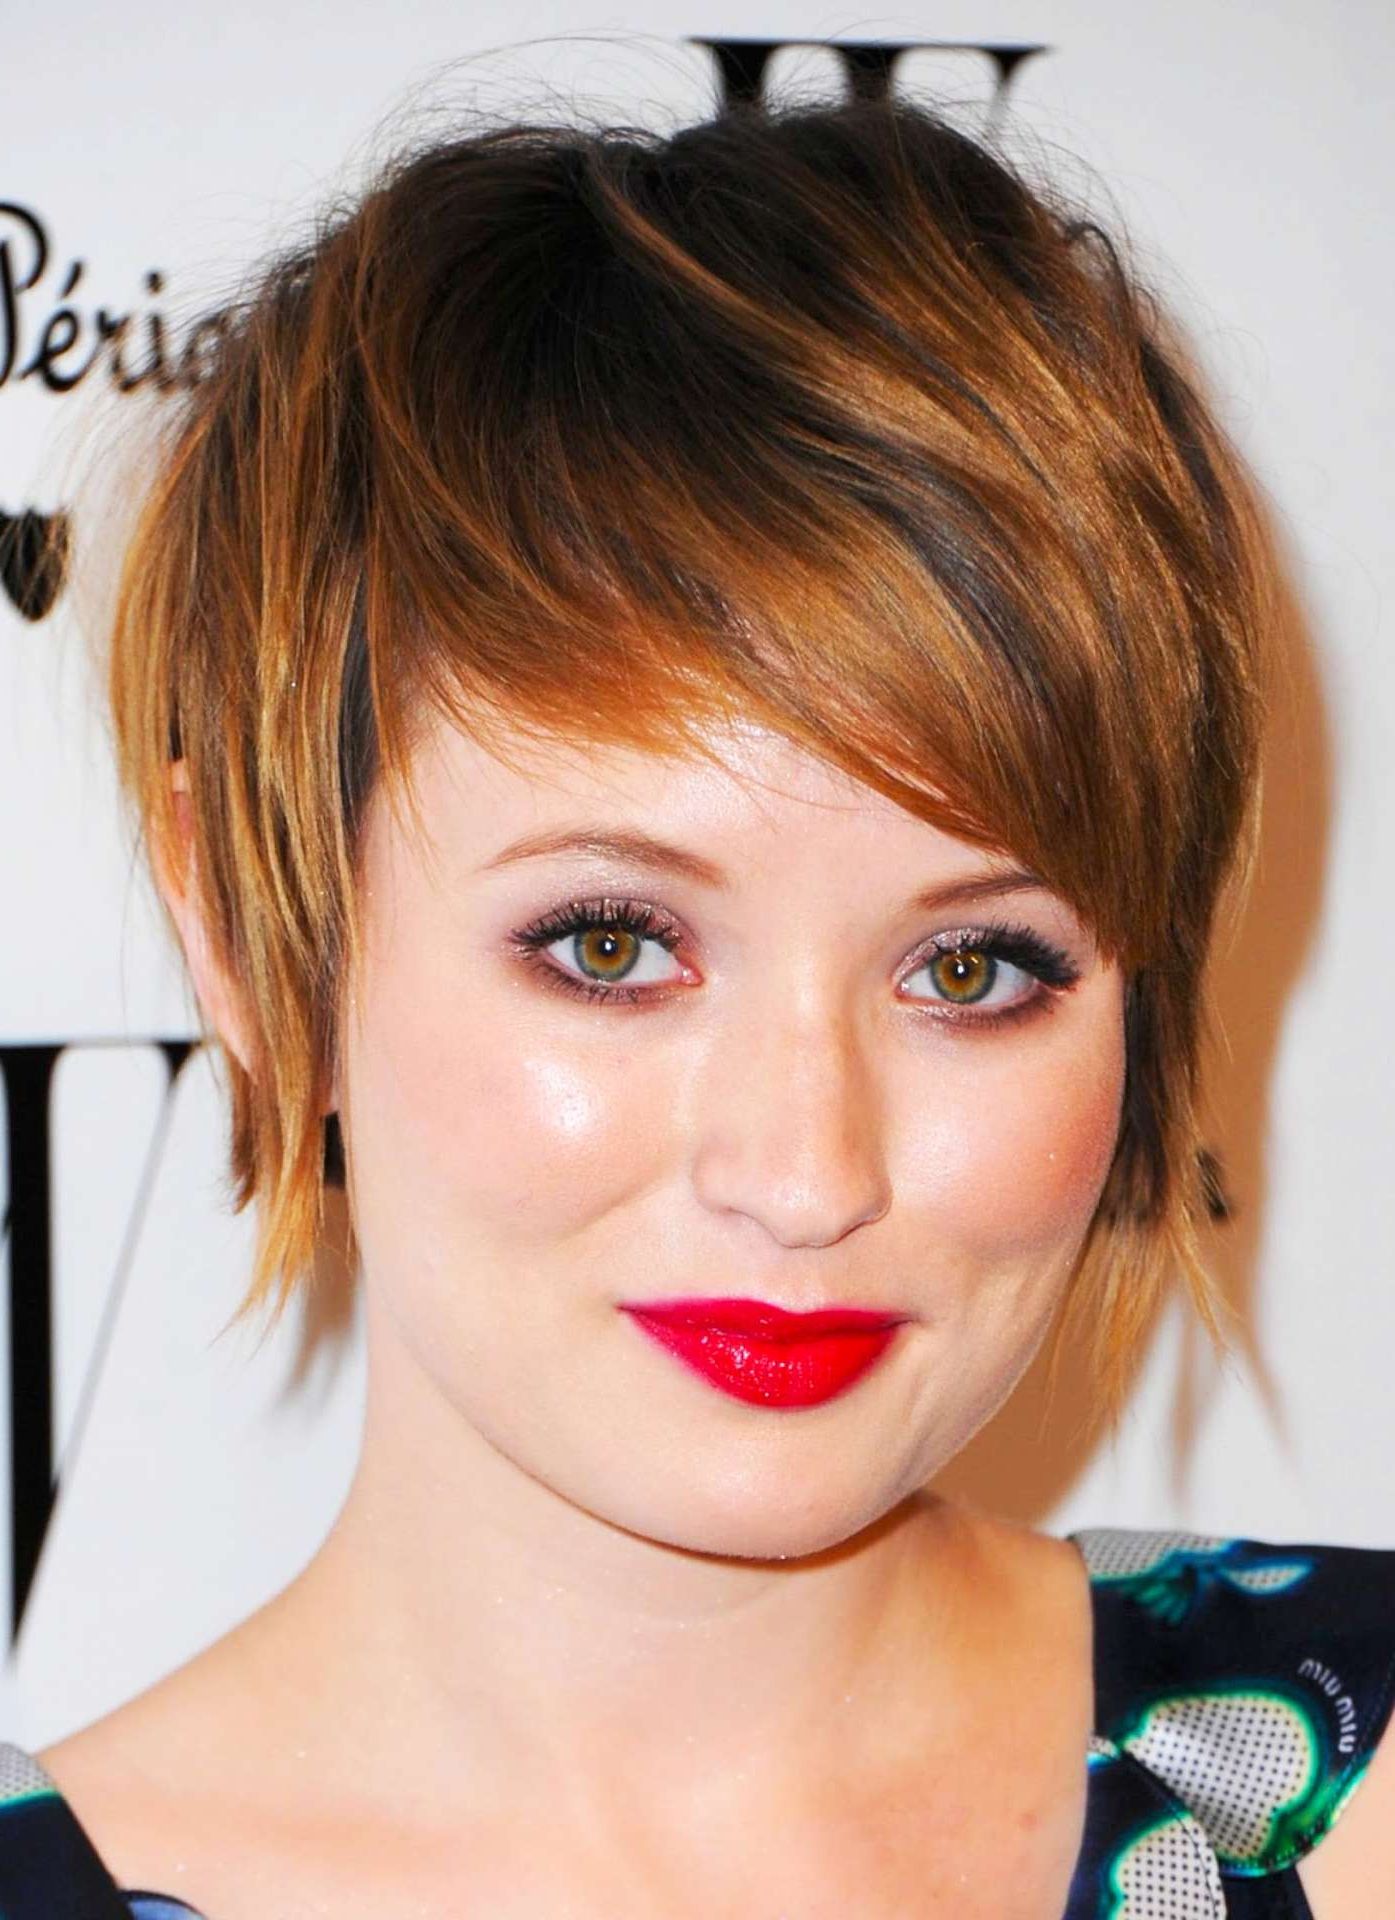 14 Best Short Haircuts For Women With Round Faces Regarding Short Haircuts Ideas For Round Faces (View 3 of 25)